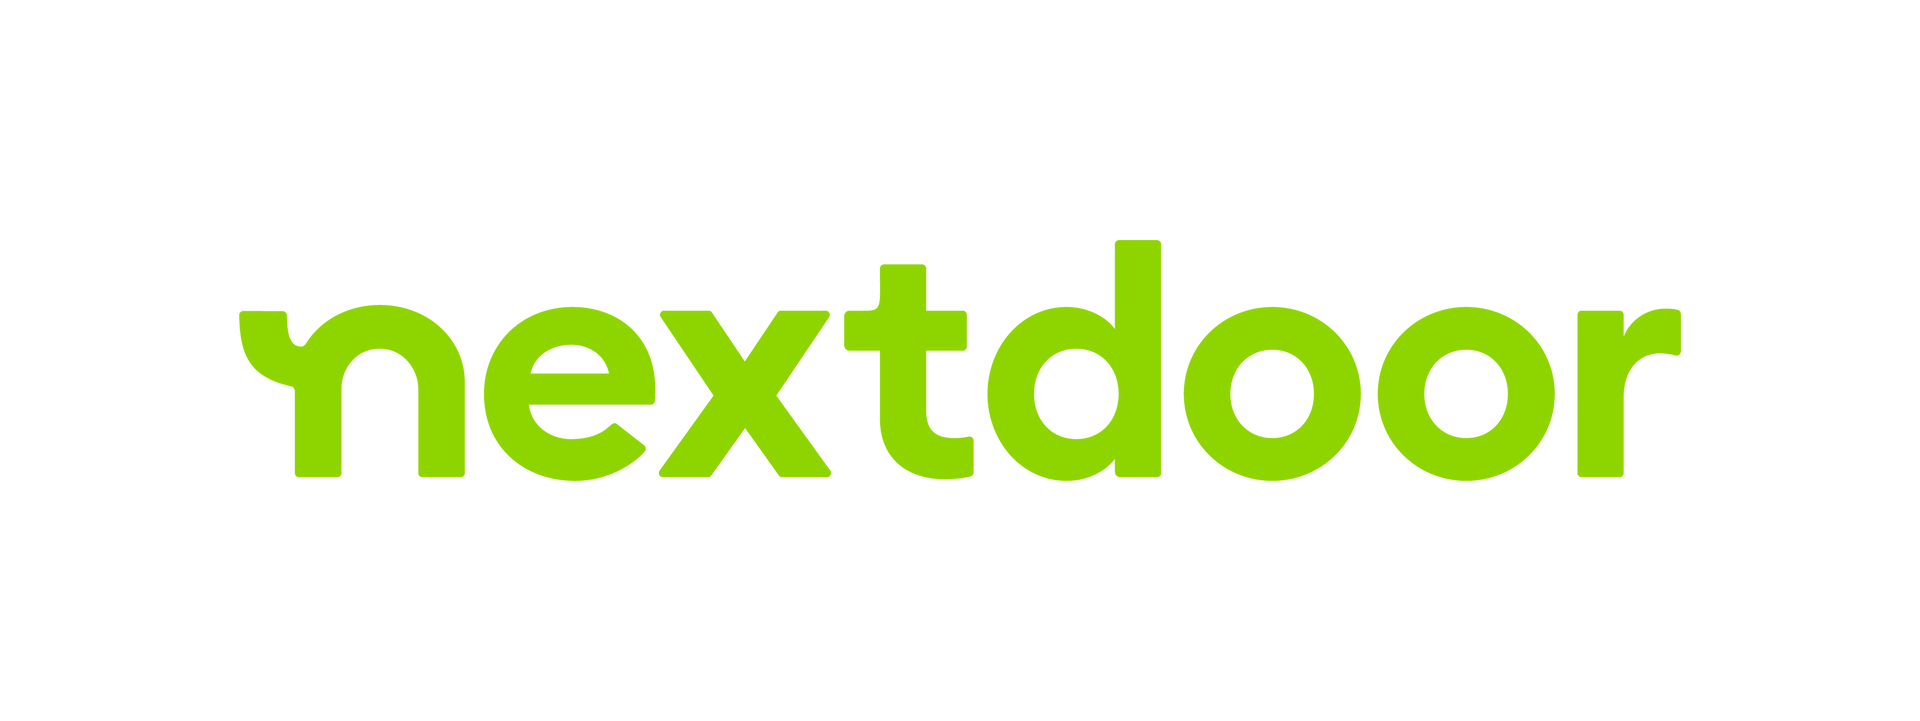 the nextdoor logo is green and white on a white background .